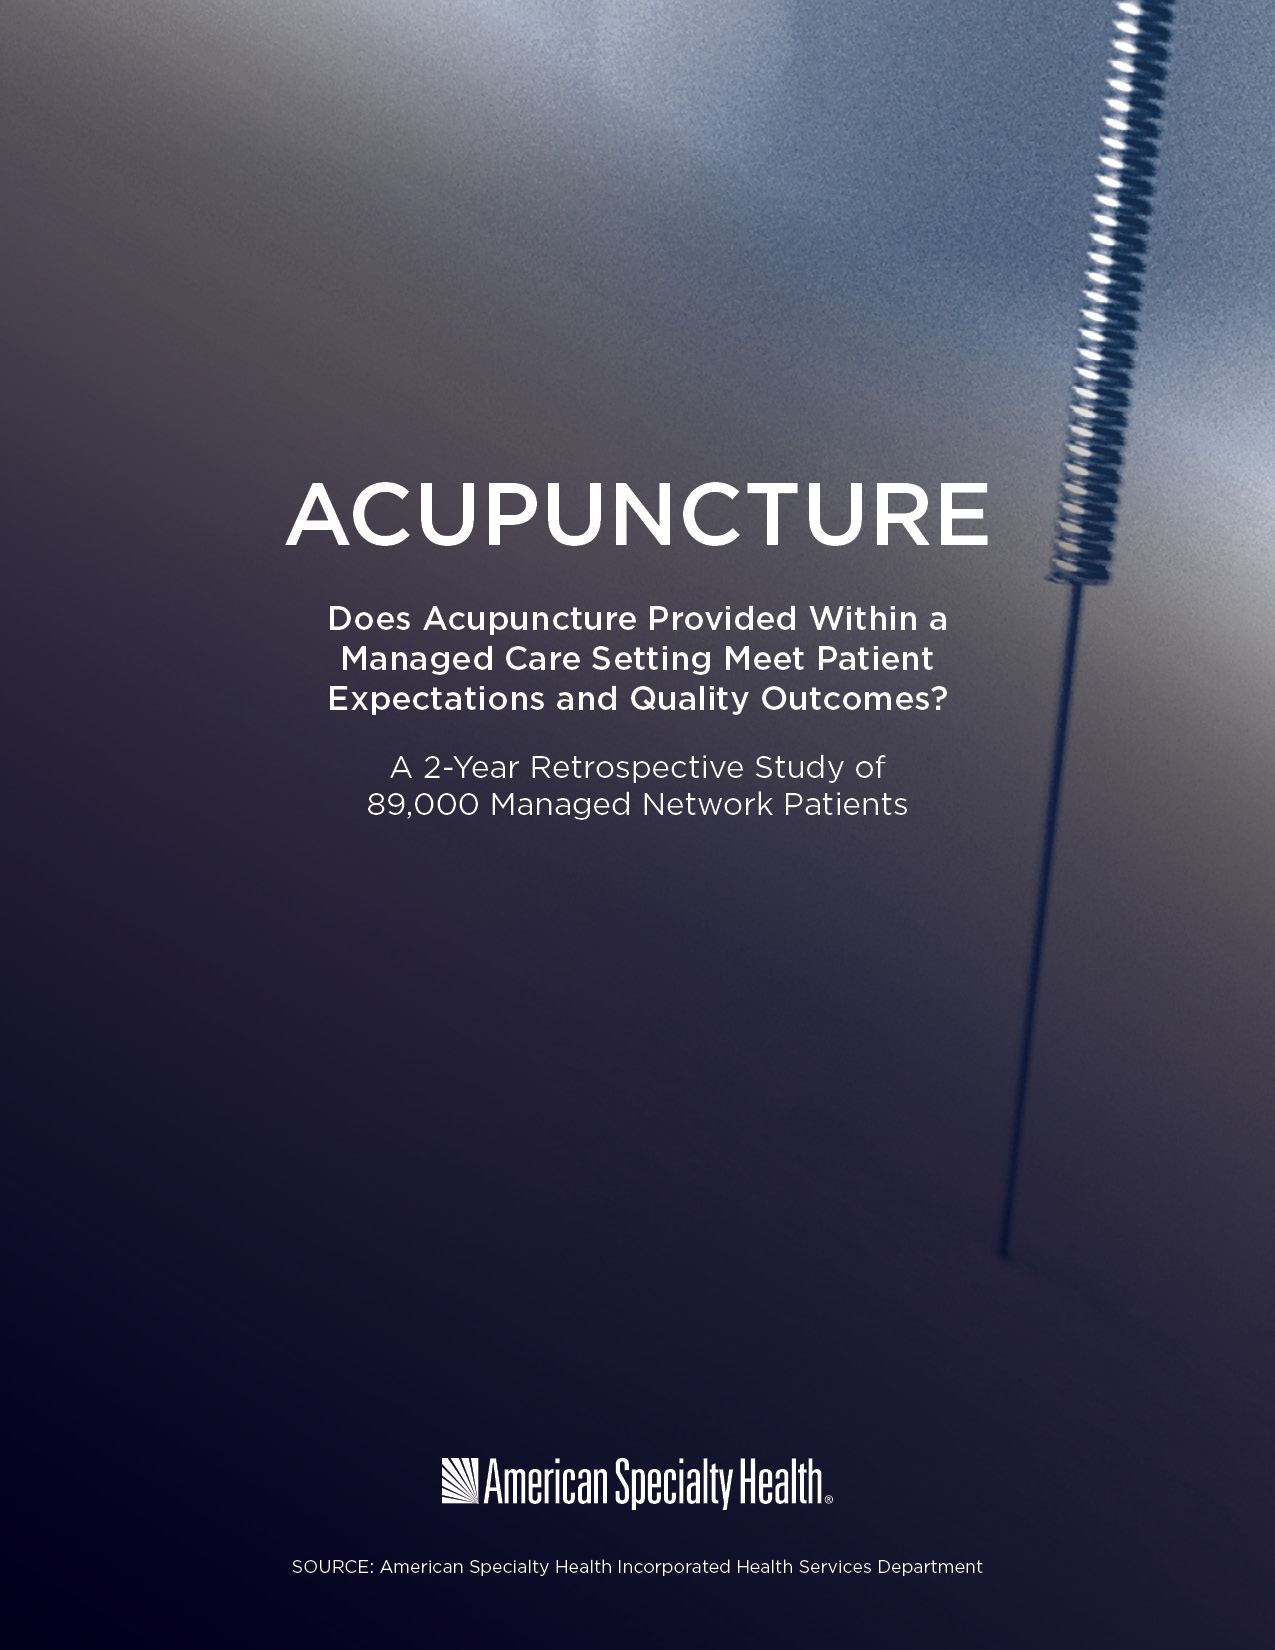 Does Acupuncture Provided Within a Managed Care Setting Meet Patient Expectations and Quality Outcomes?